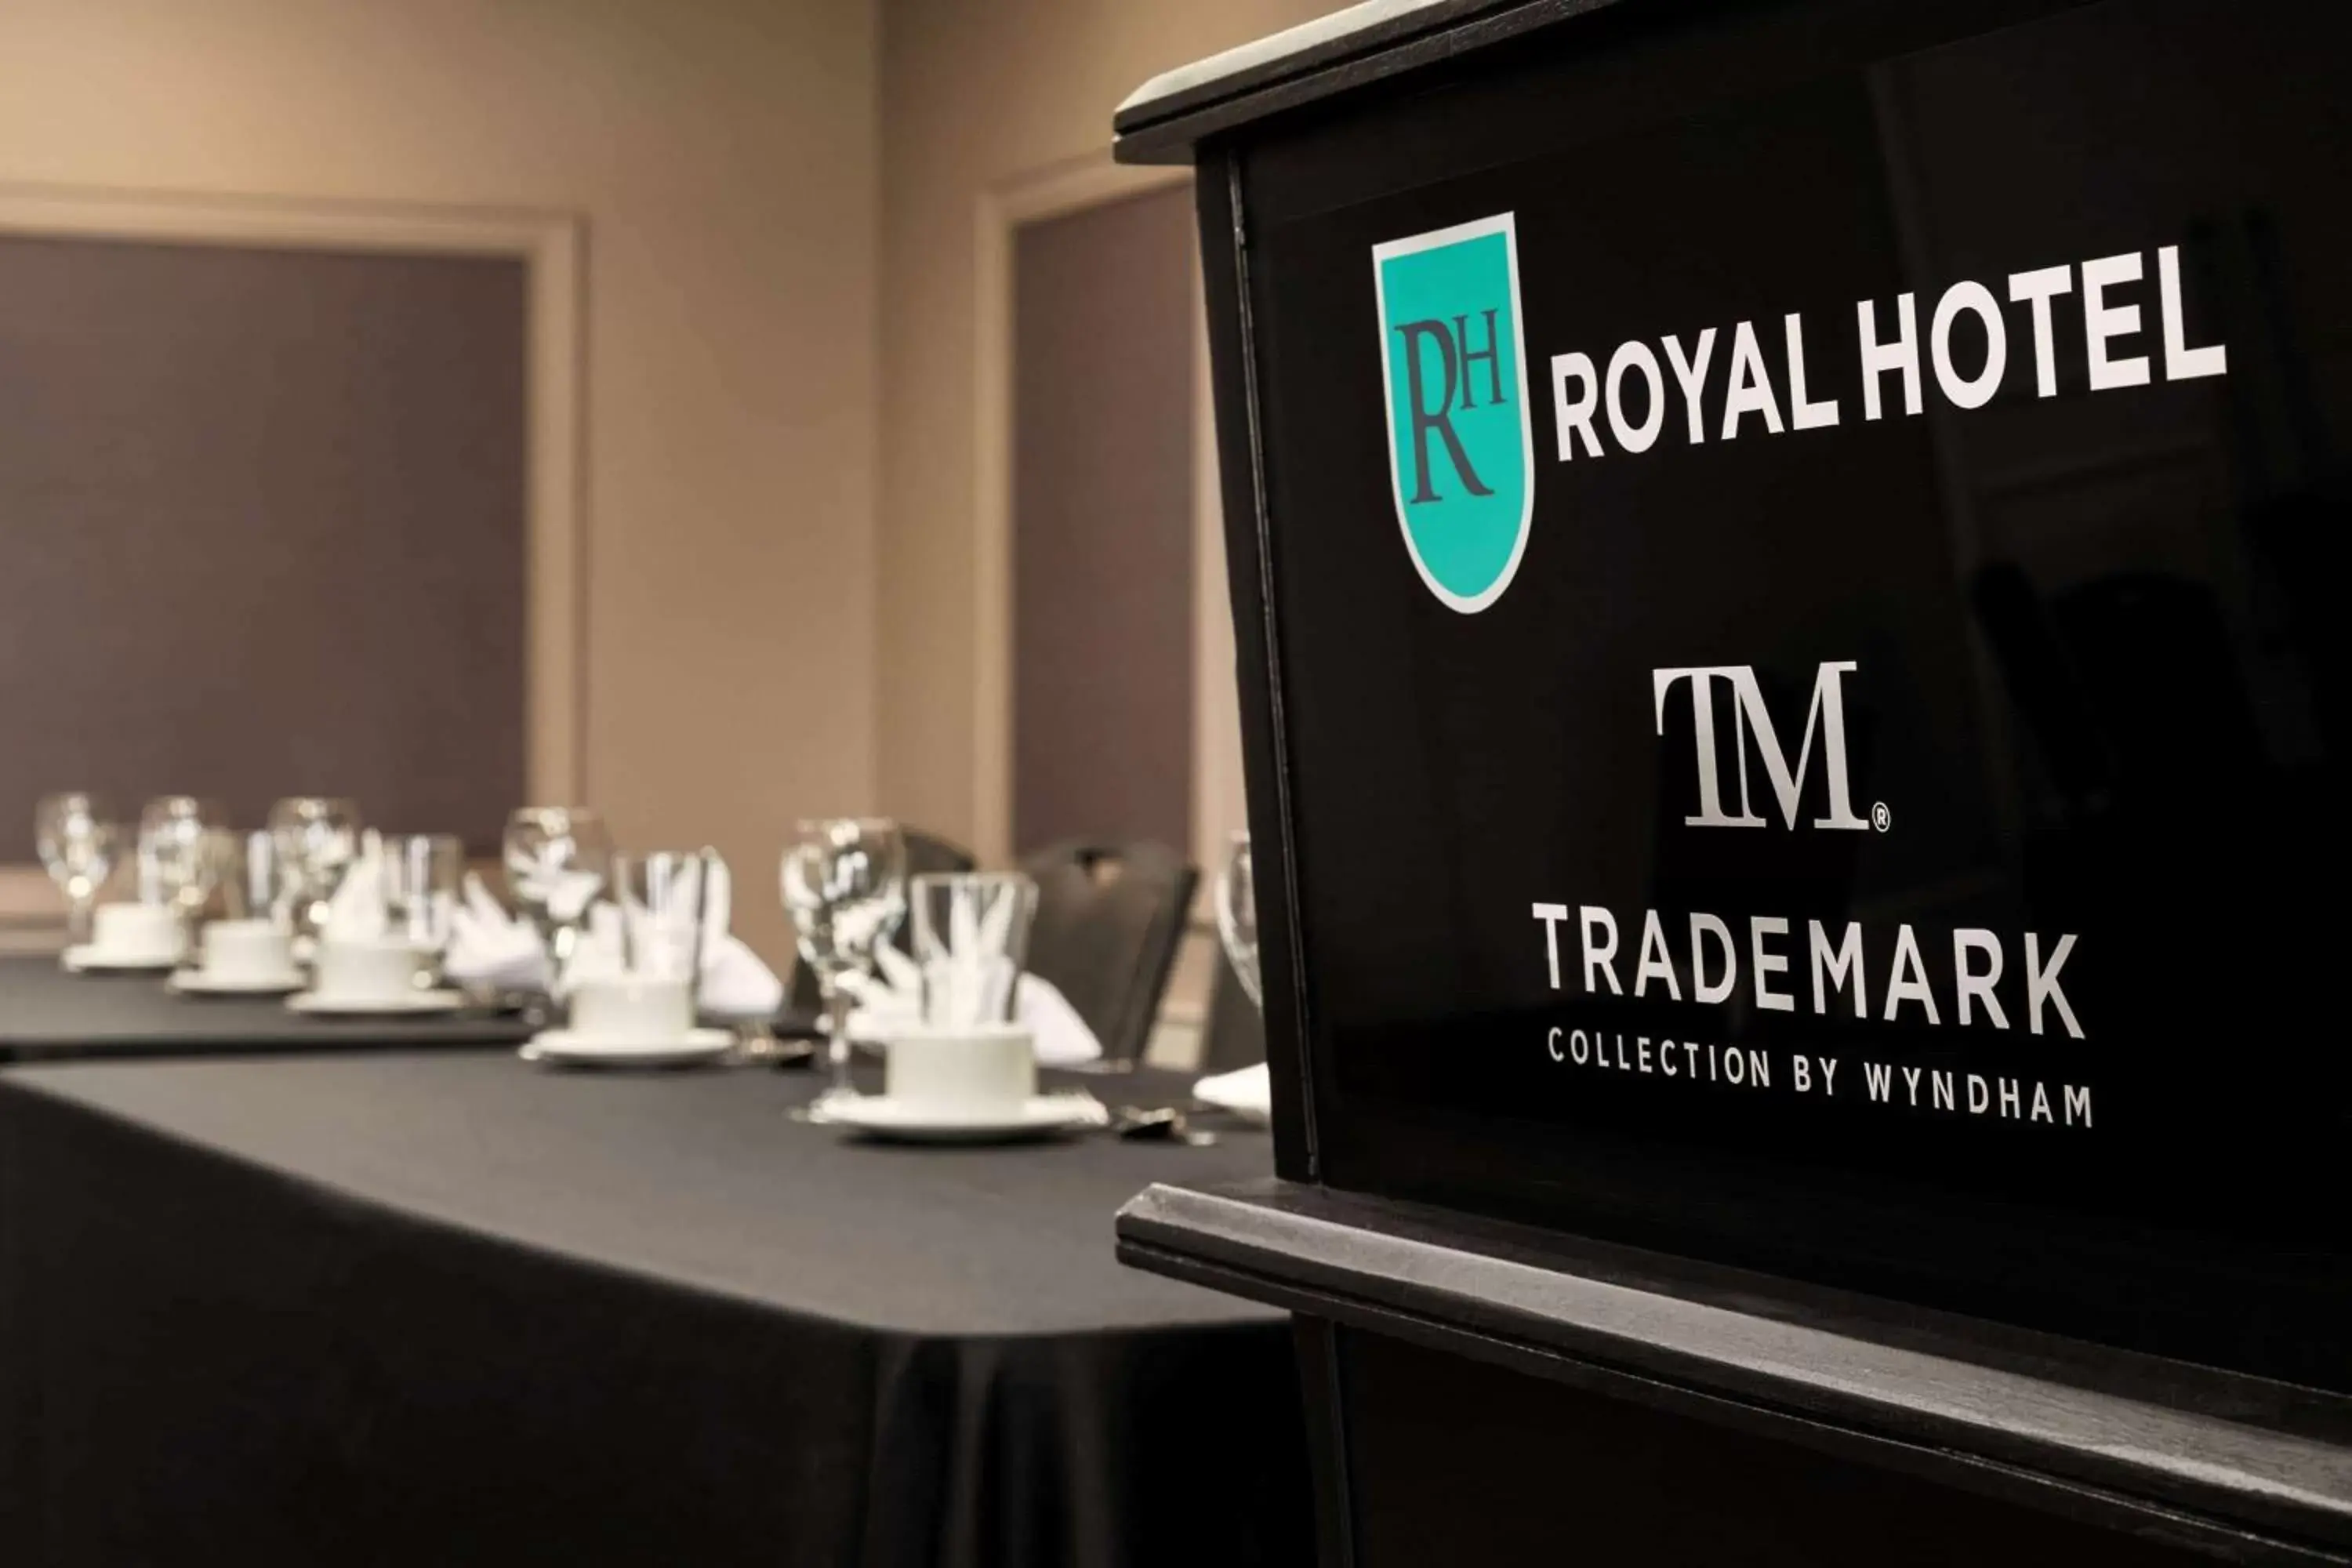 Banquet/Function facilities in Royal Hotel Calgary, Trademark Collection by Wyndham